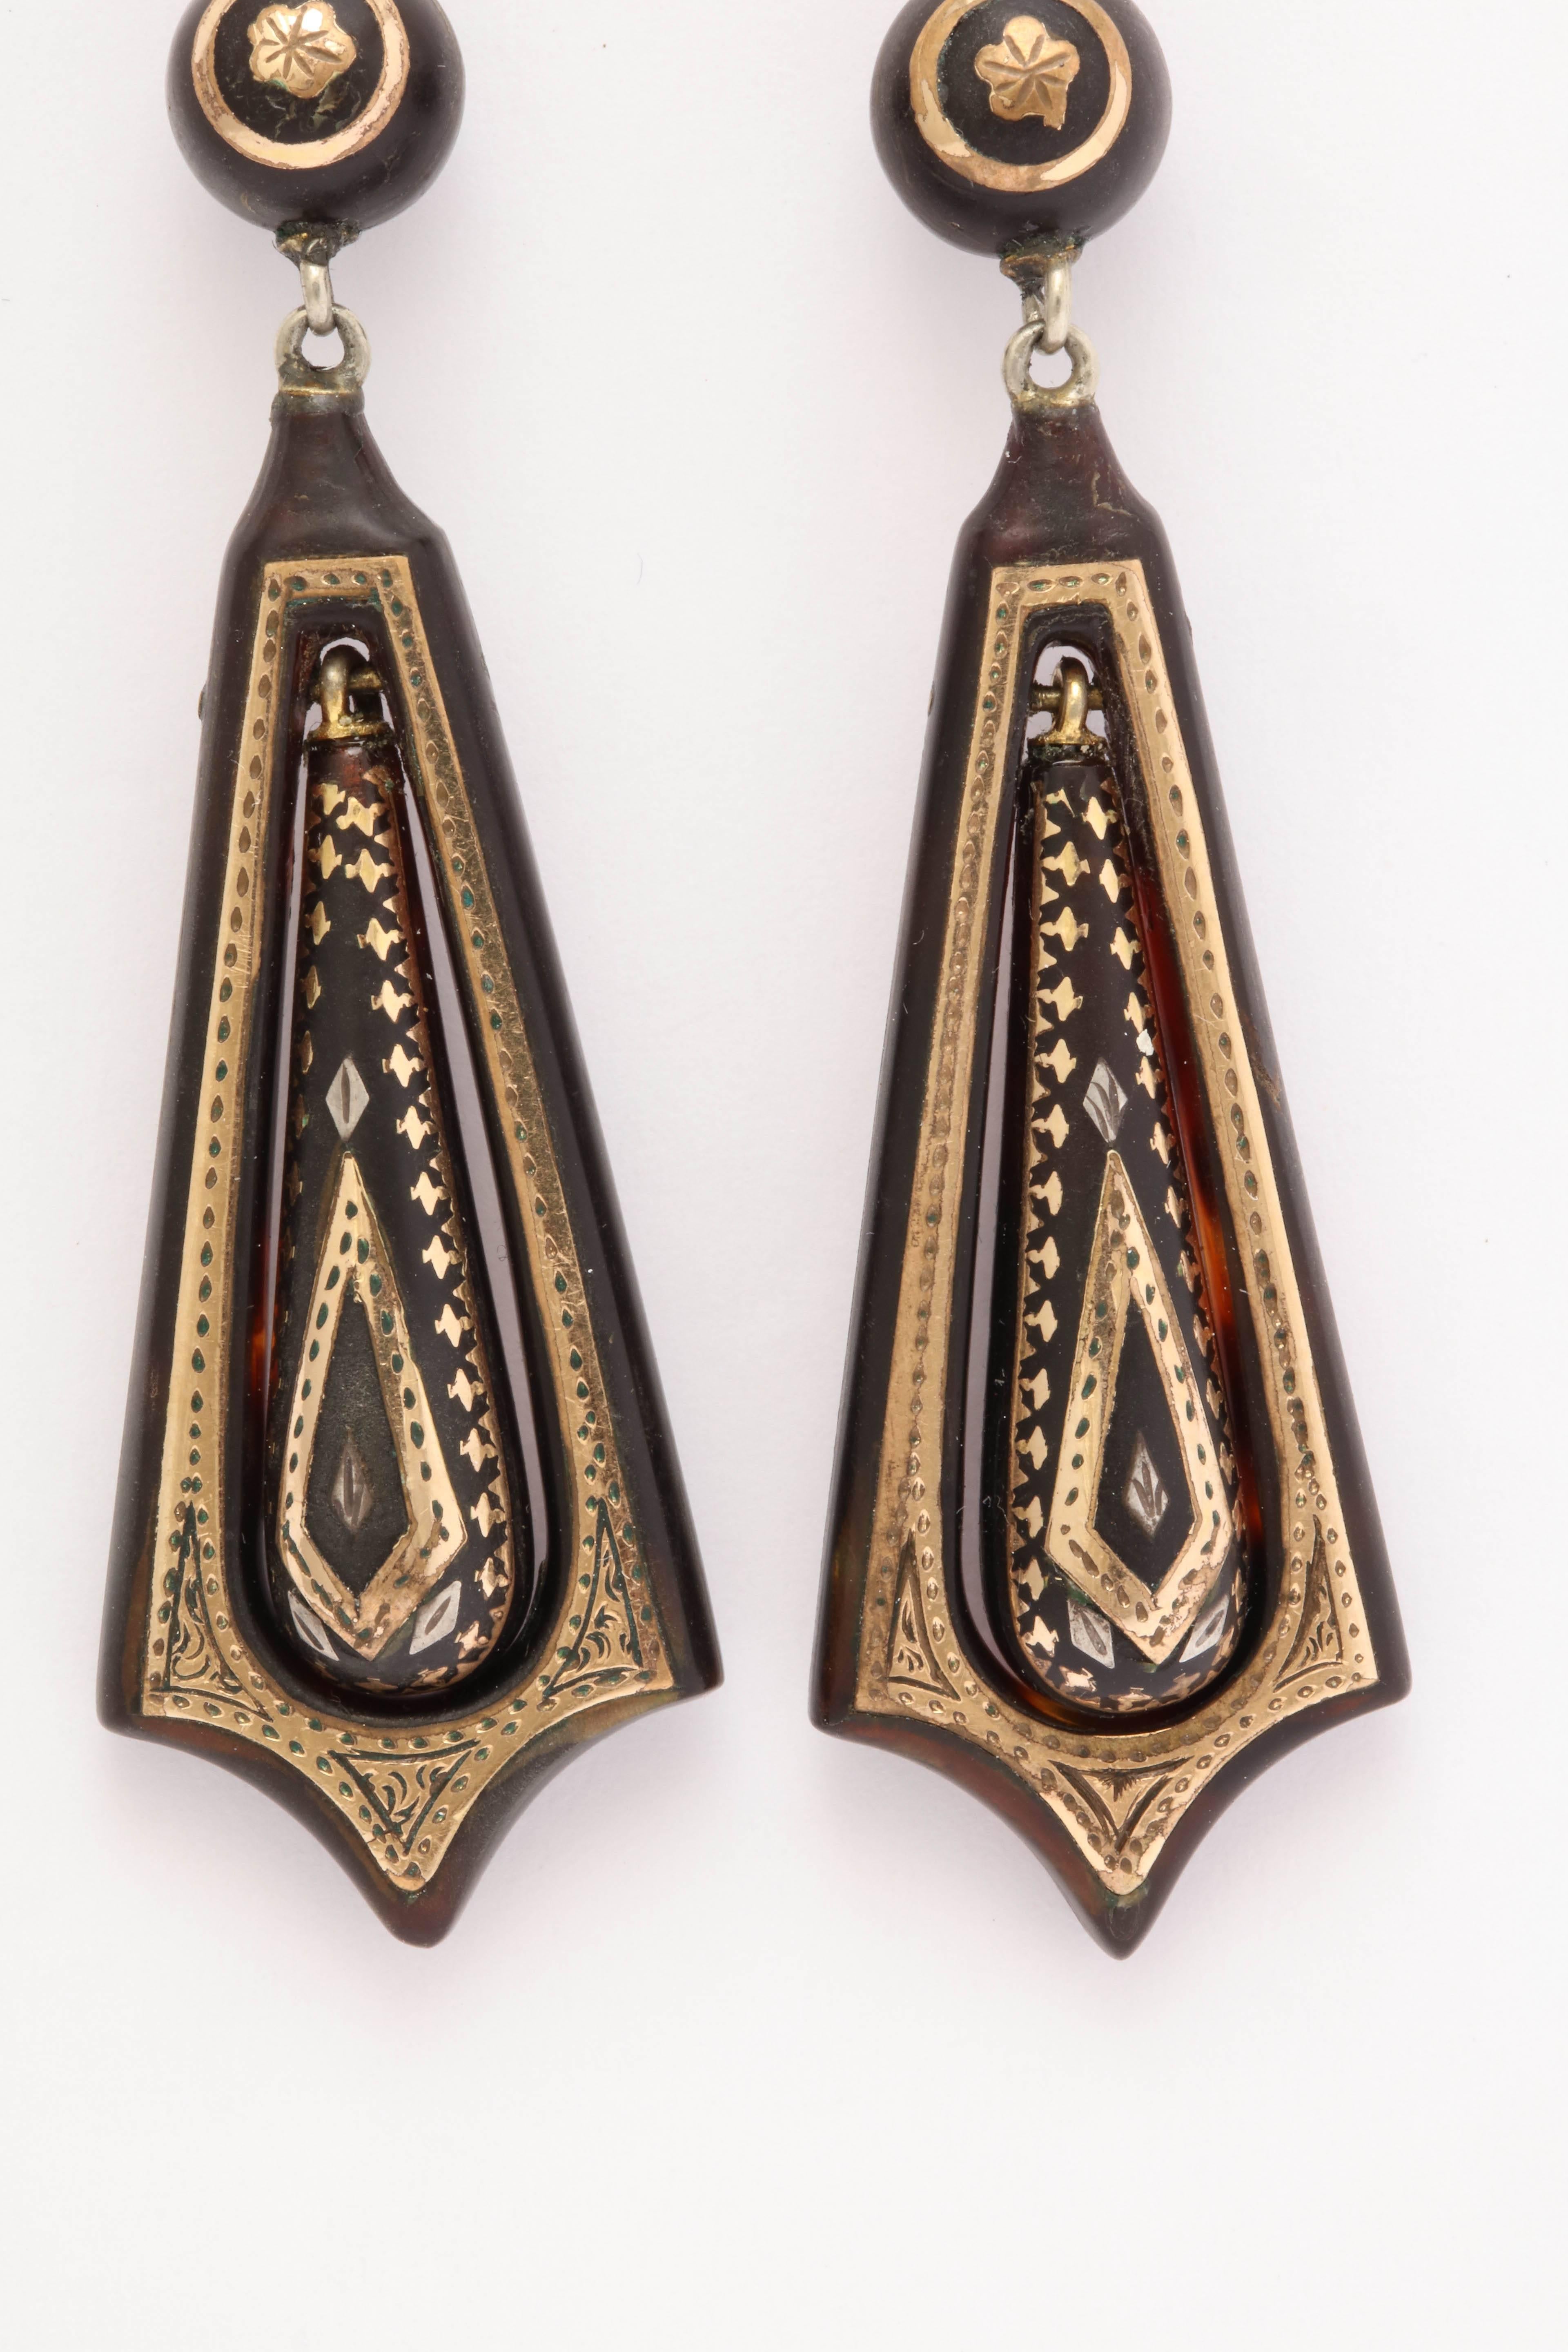 In excellent condition and of beautiful design, these pique earrings are a wonderful example of this inlay technique. 14K ear wires. 